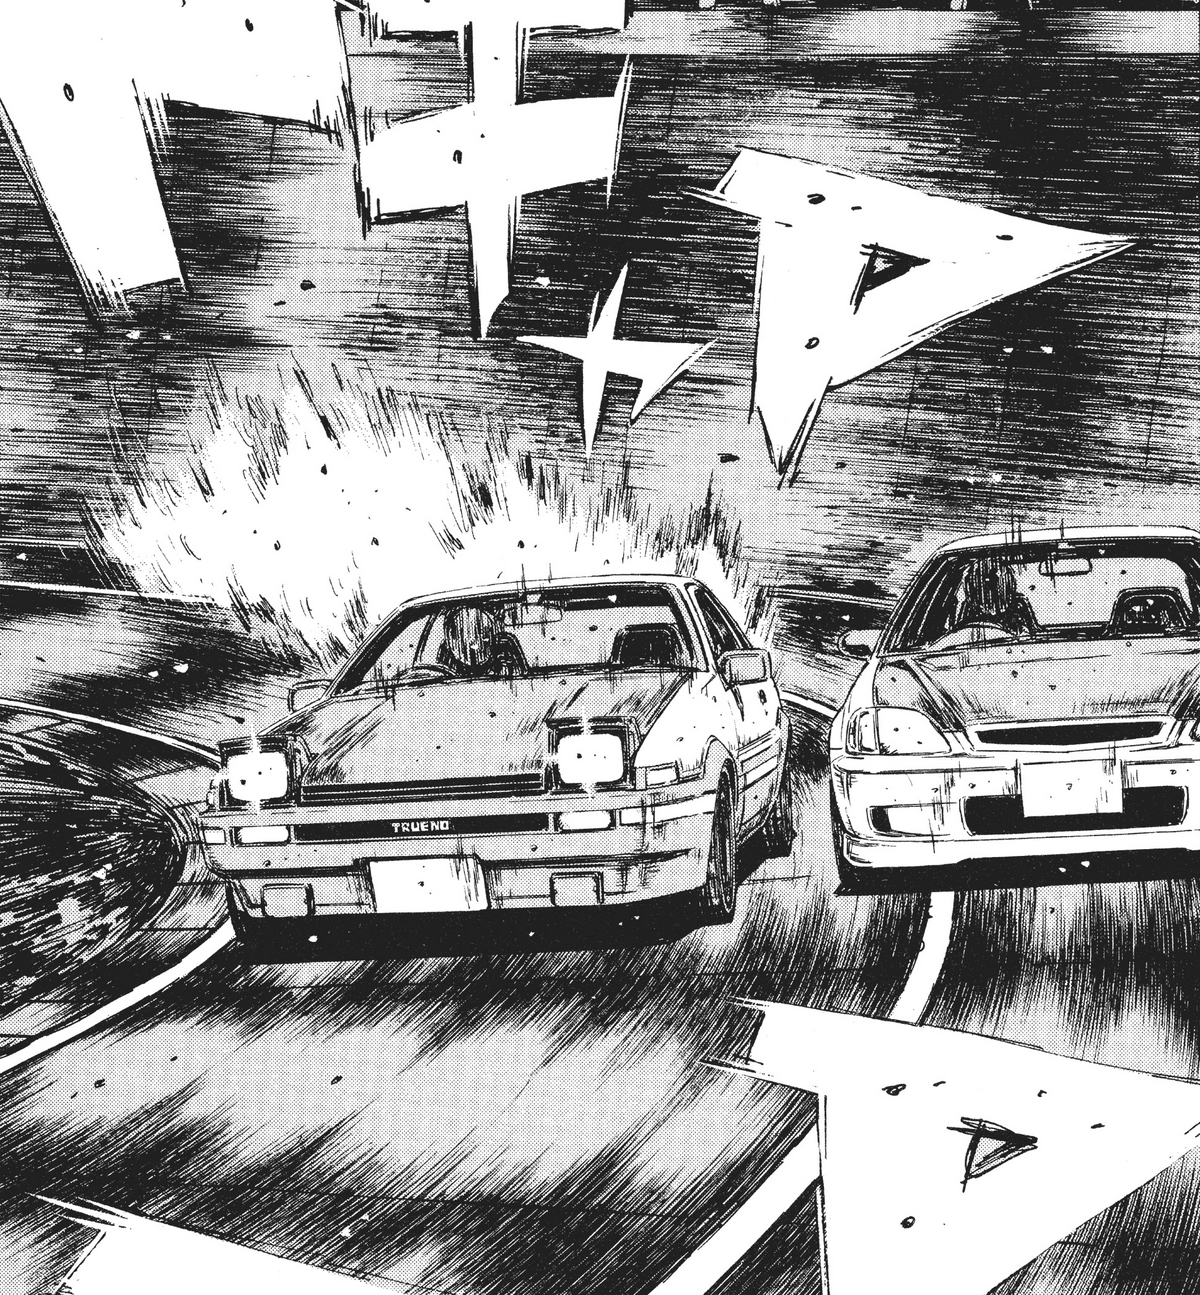 Initial D Fourth Stage Todos os Episódios Online » Anime TV Online